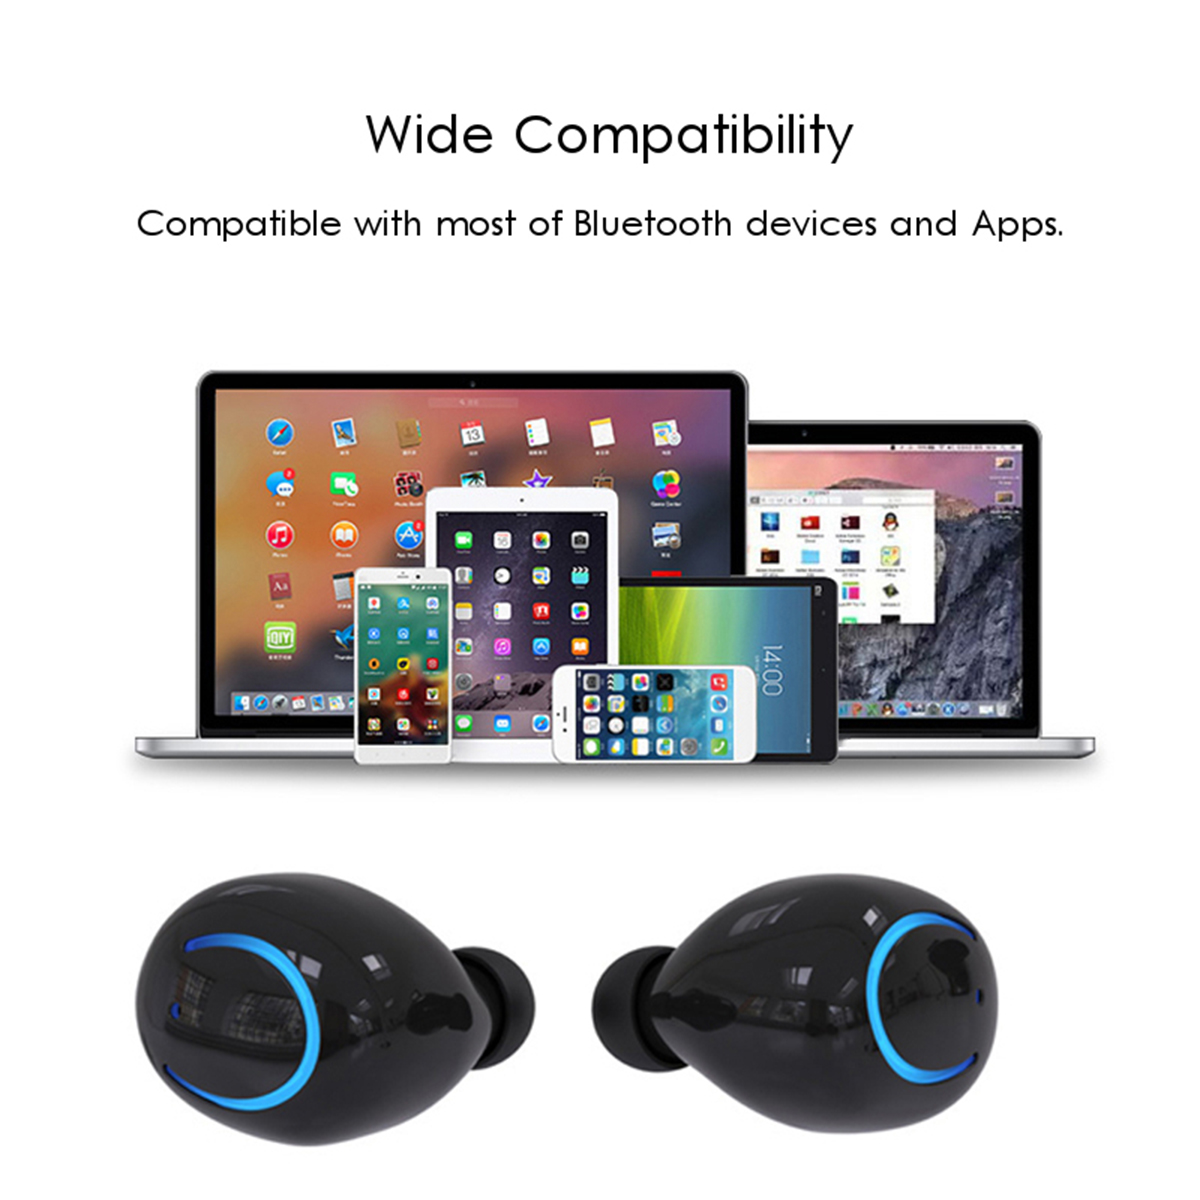 [Bluetooth 5.0] TWS True Wireless Earphone Dual Single Earbud Noise Cancelling Mic with Charging Box 15